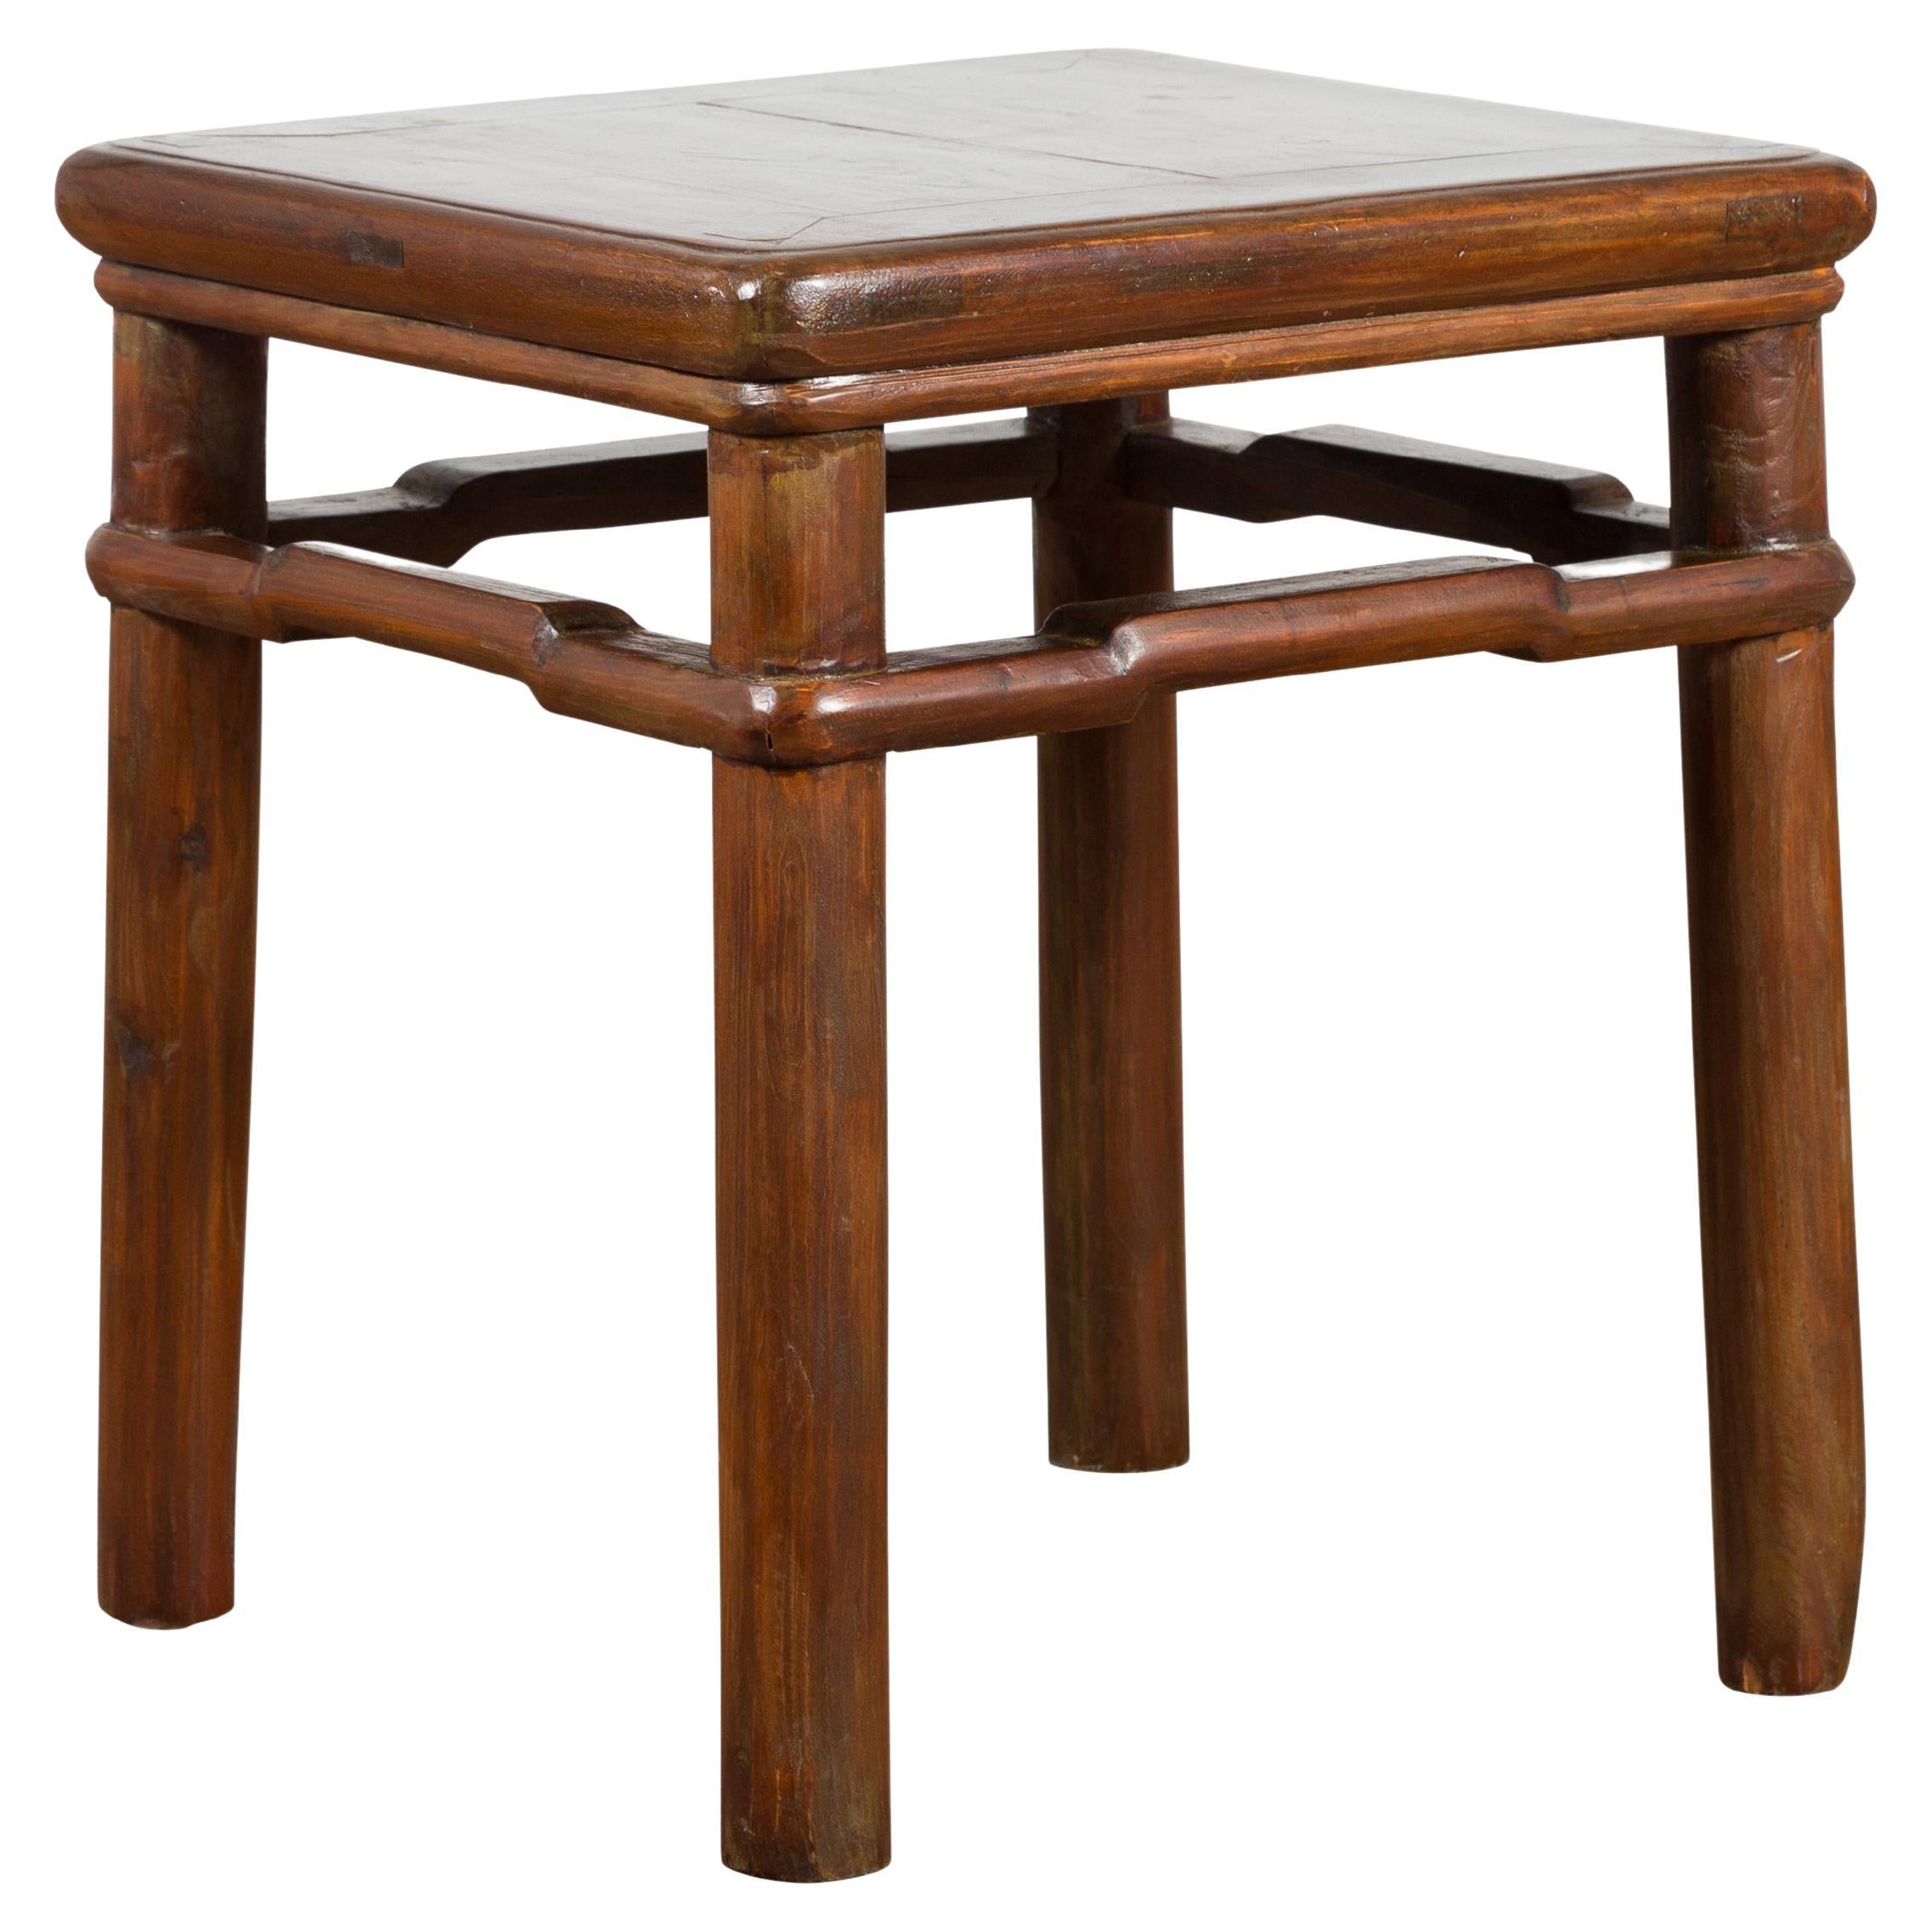 Chinese Qing Dynasty Period 19th Century Side Table with Humpback Stretchers For Sale